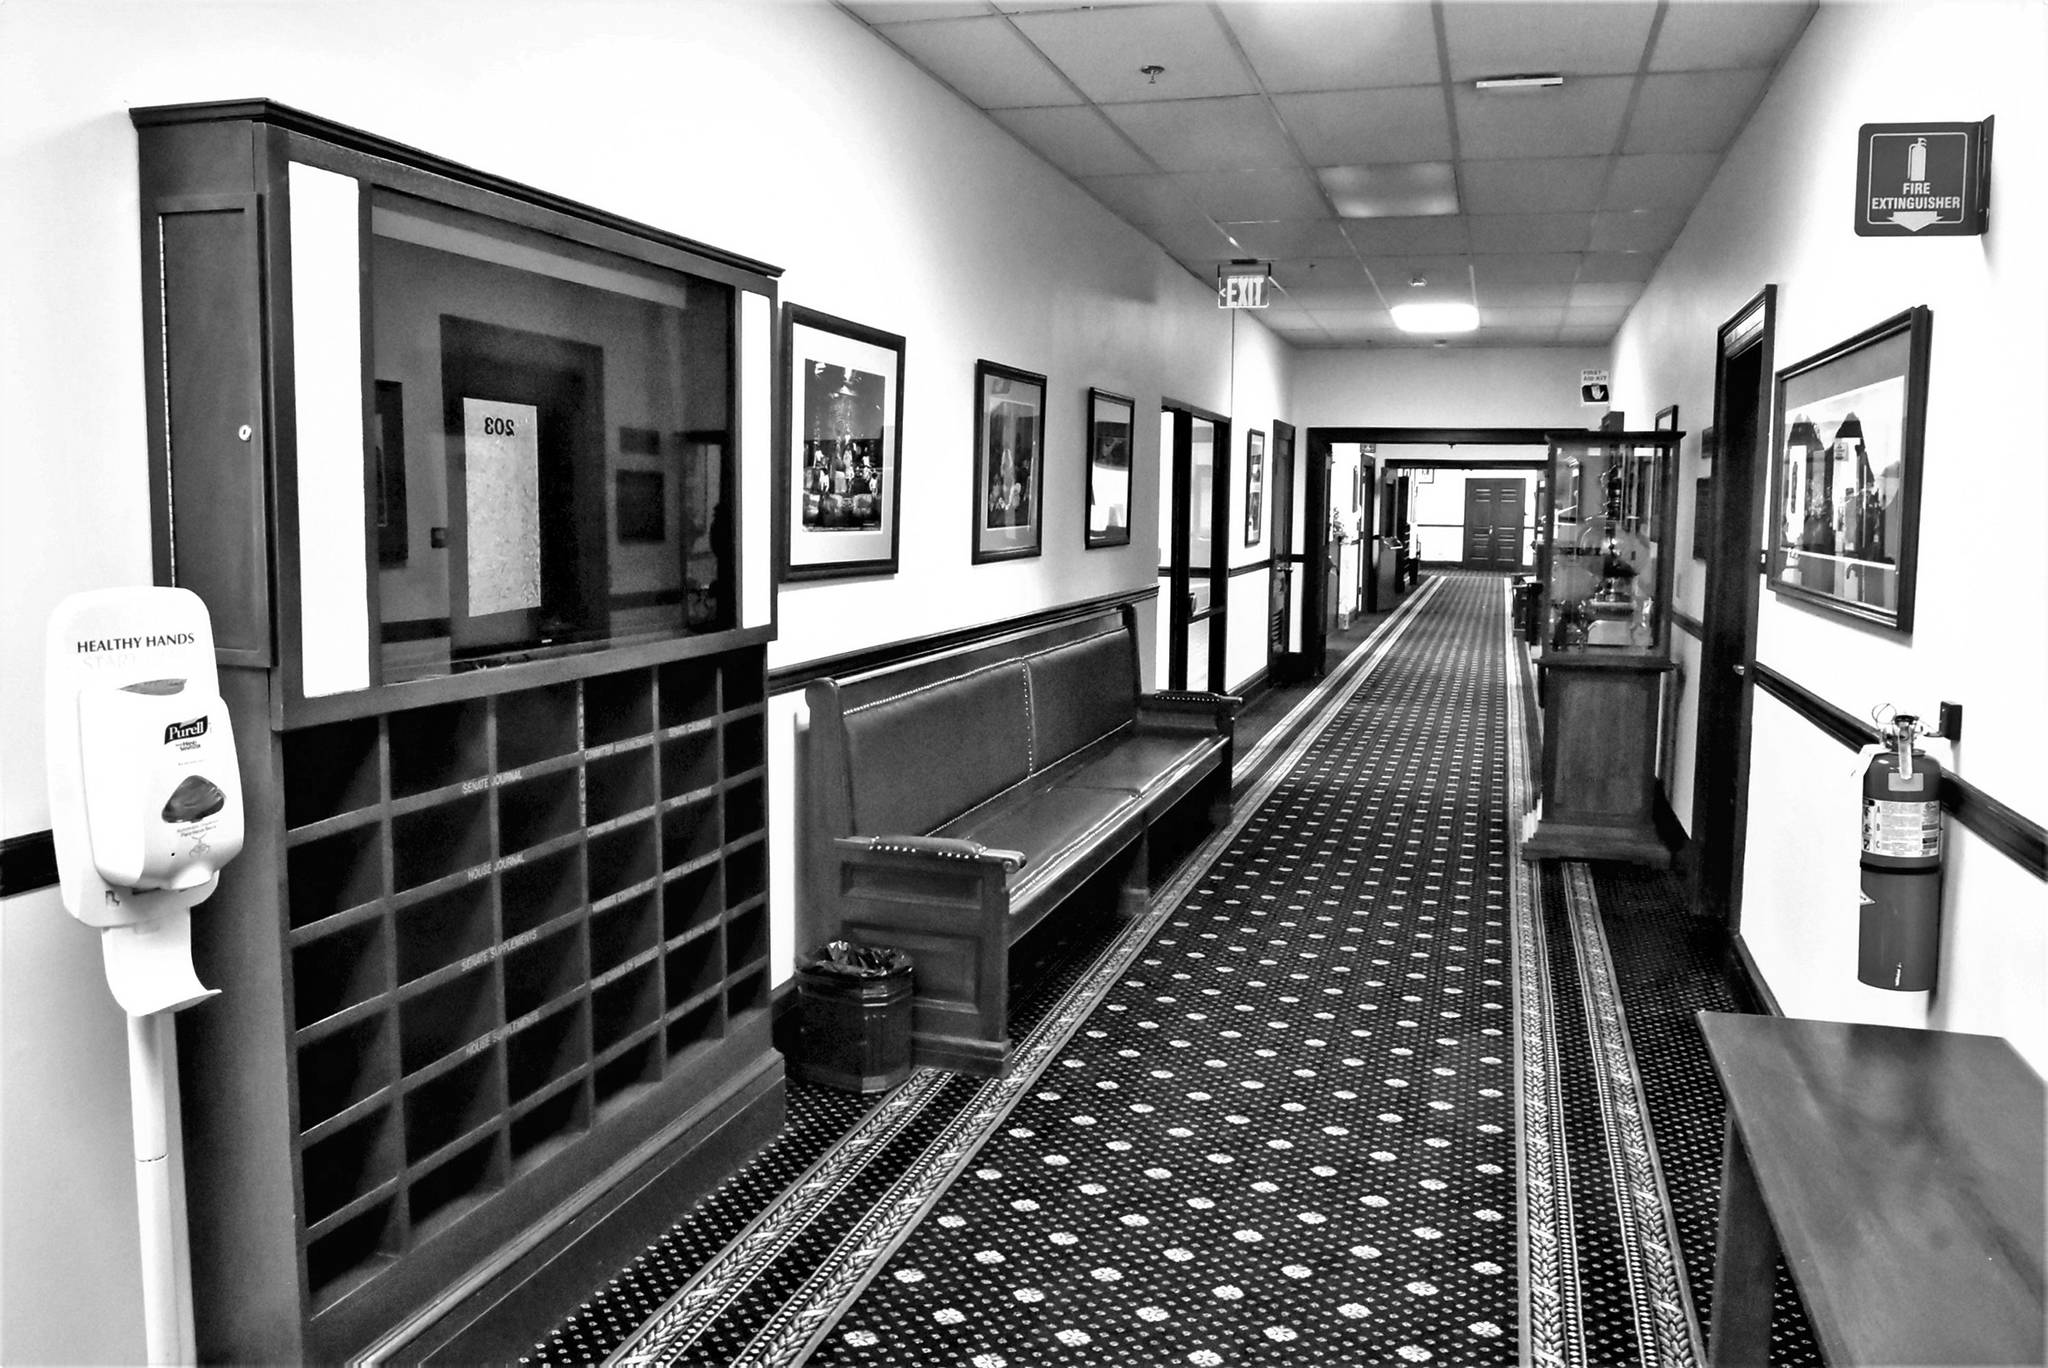 Photo by Peter Segall | Juneau Empire                                 The halls of the State Capitol were empty Monday, March 30, as most lawmakers and their staff have returned to their home districts. The Legislature is recessed rather than adjourned, which means they can be called back to take action is necessary.